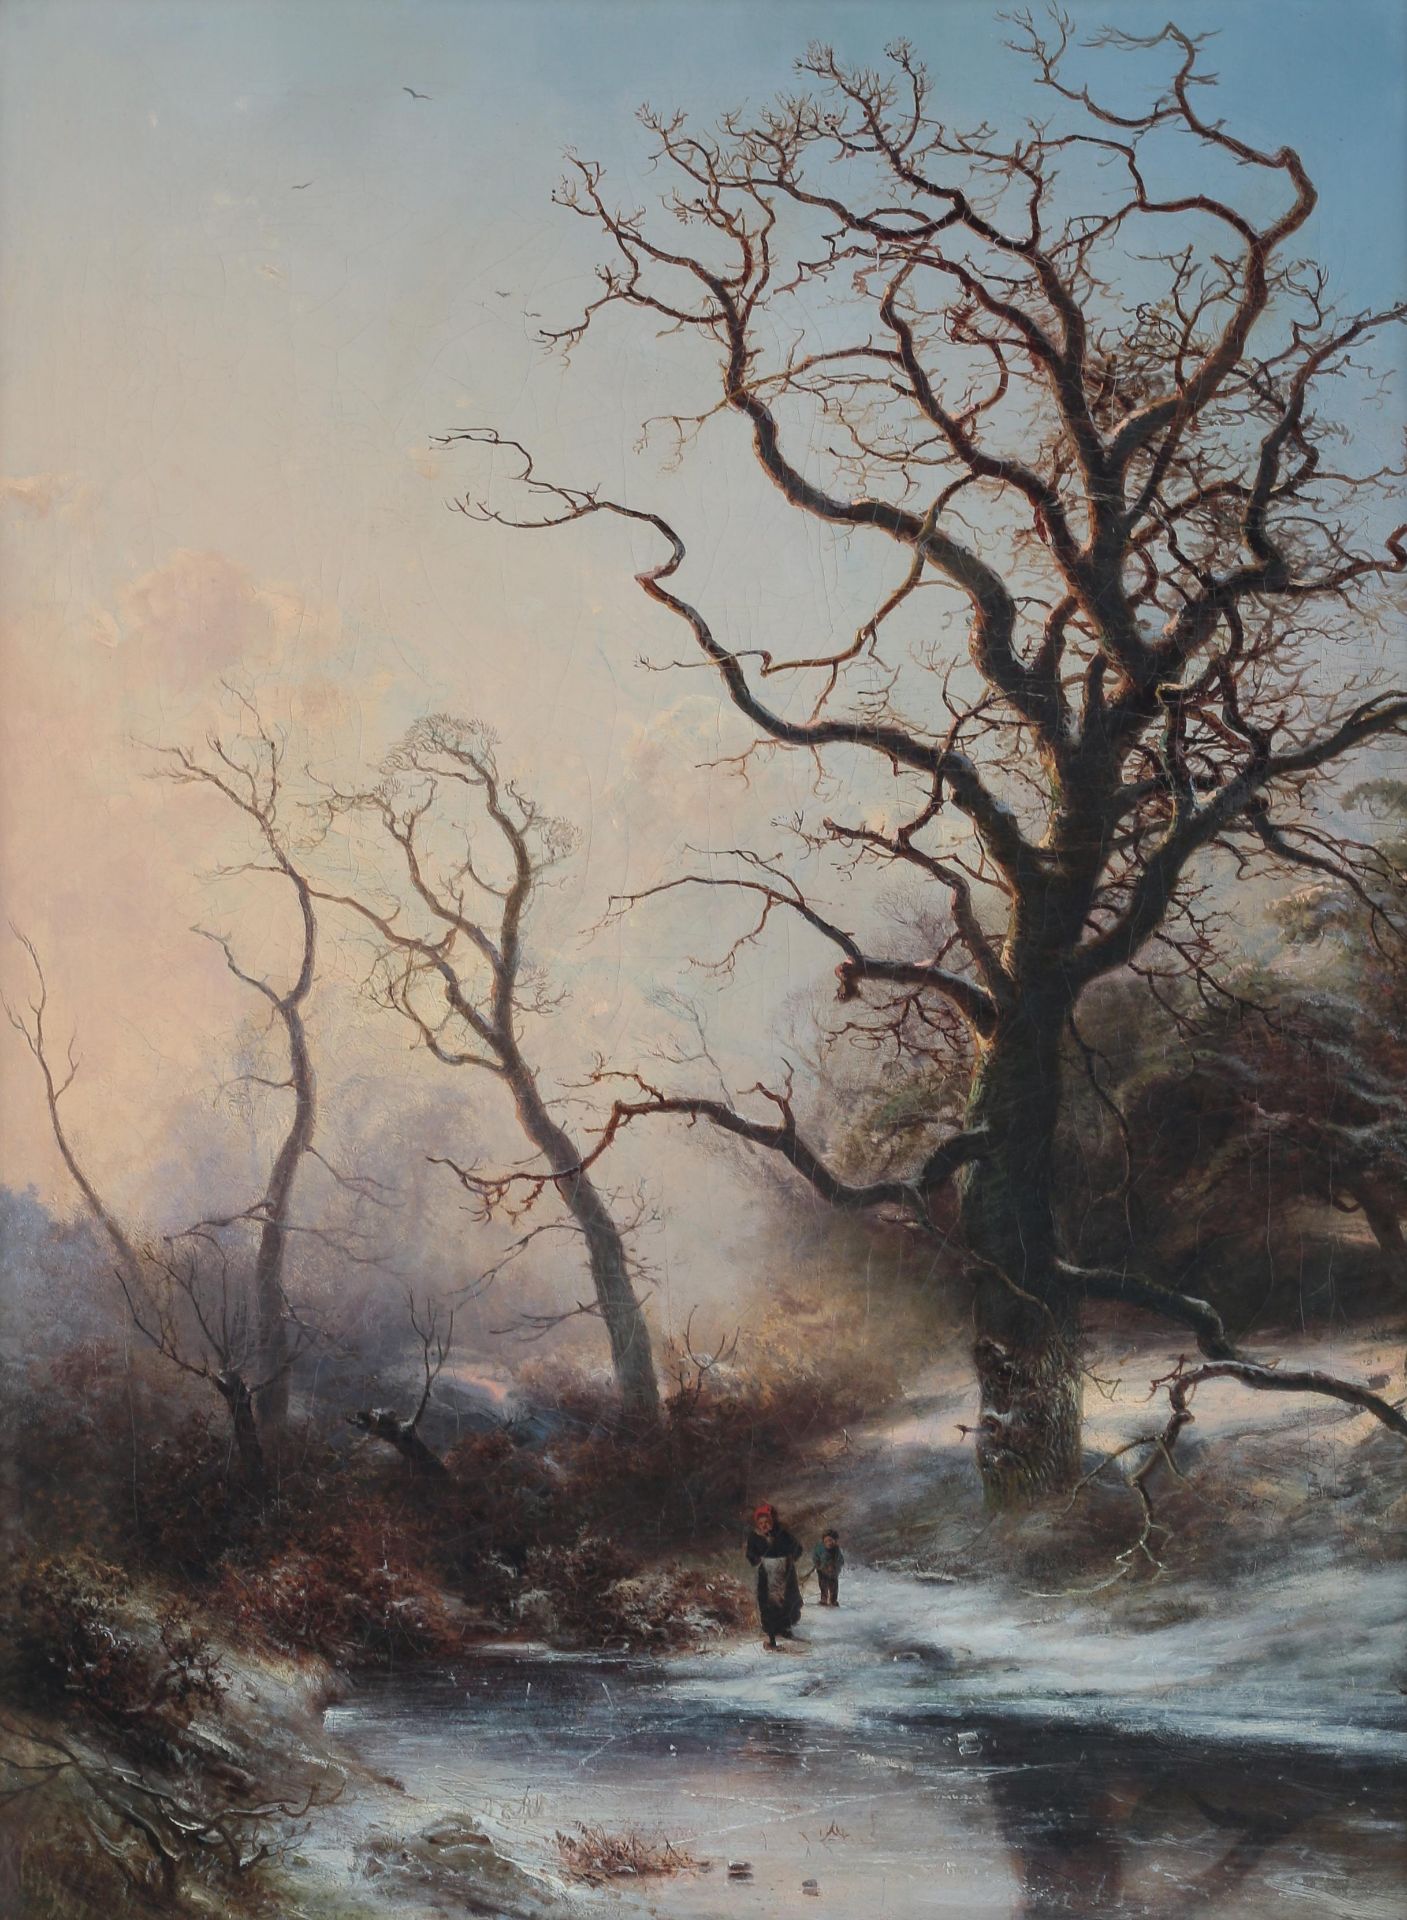 Pieter Lodewijk Kluyver (1816-1900) Wooded landscape in winter with figures by a frozen pond. Signed